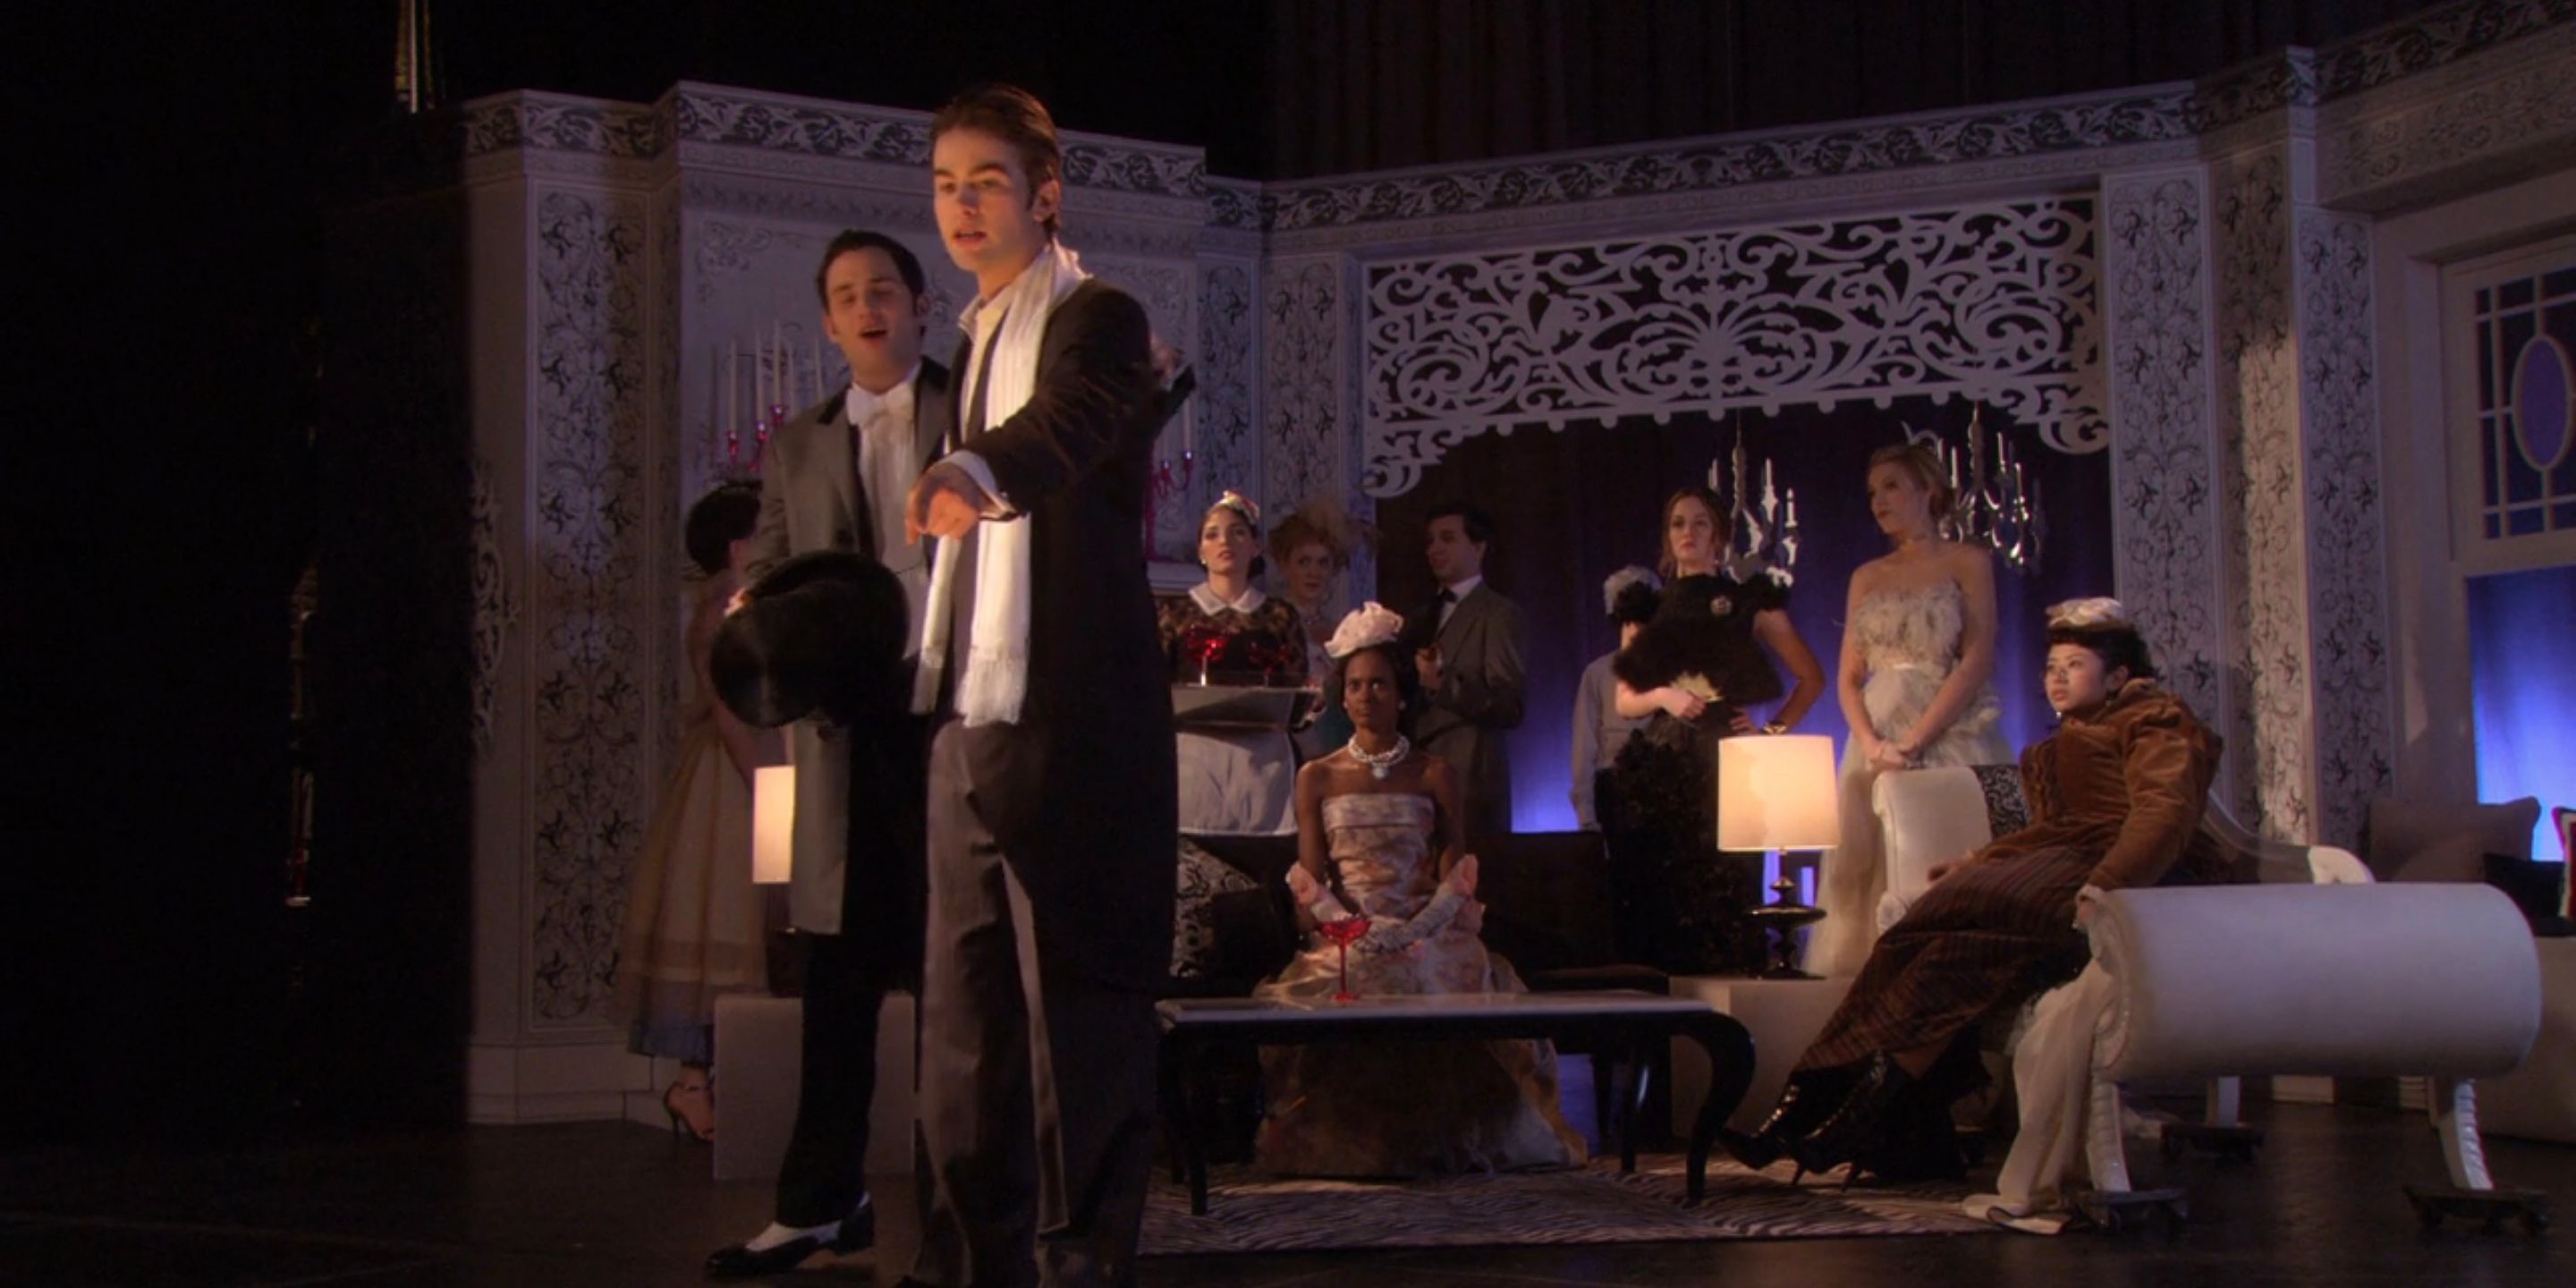 The students put on a play in Gossip Girl.